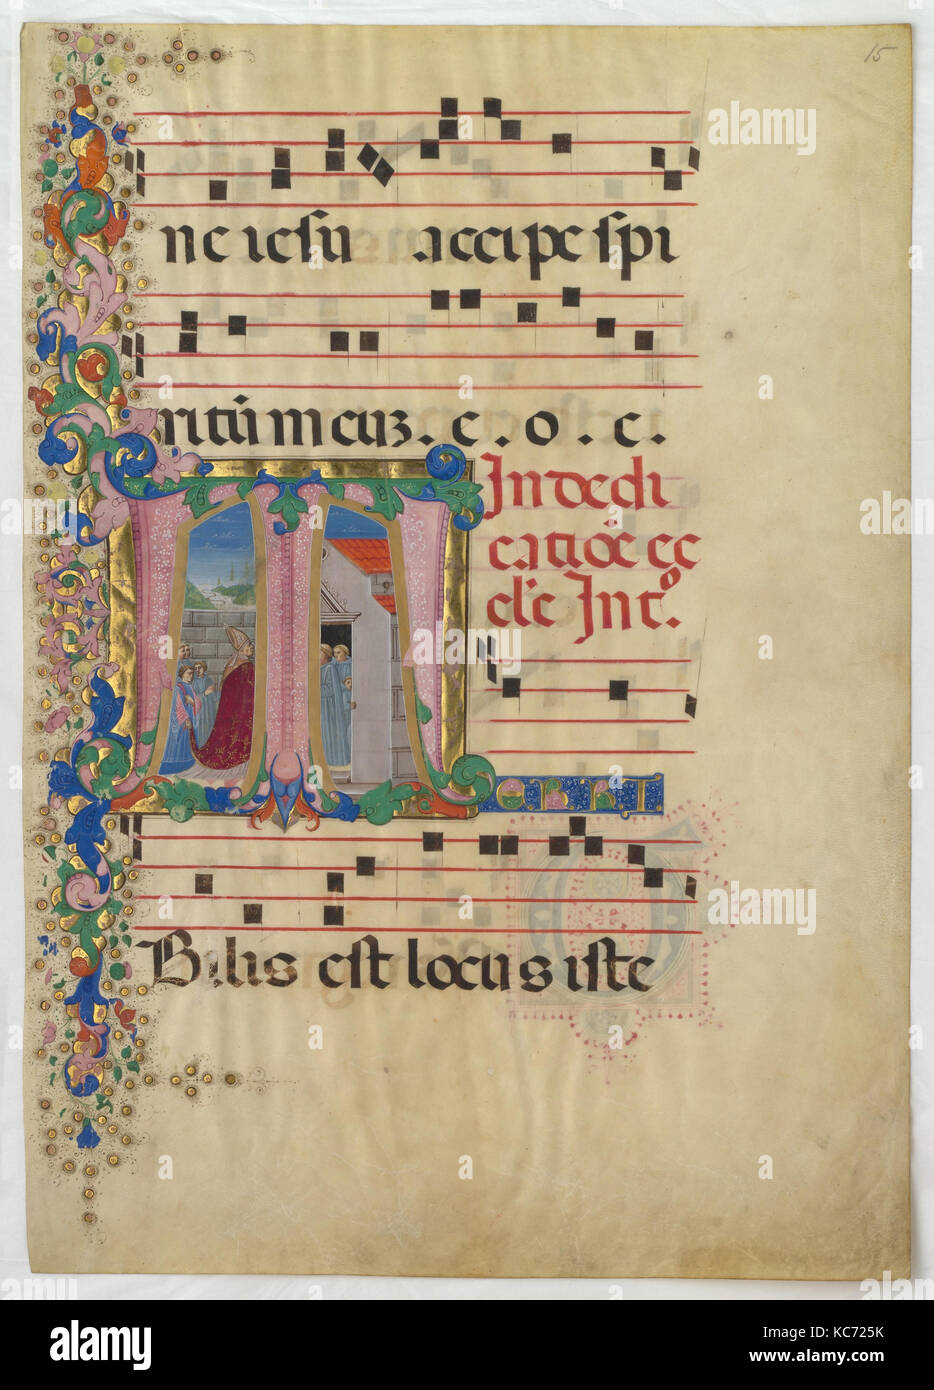 Manuscript Leaf with the Dedication of a Church in an Initial T, from a Gradual, Mariano del Buono, second half 15th century Stock Photo